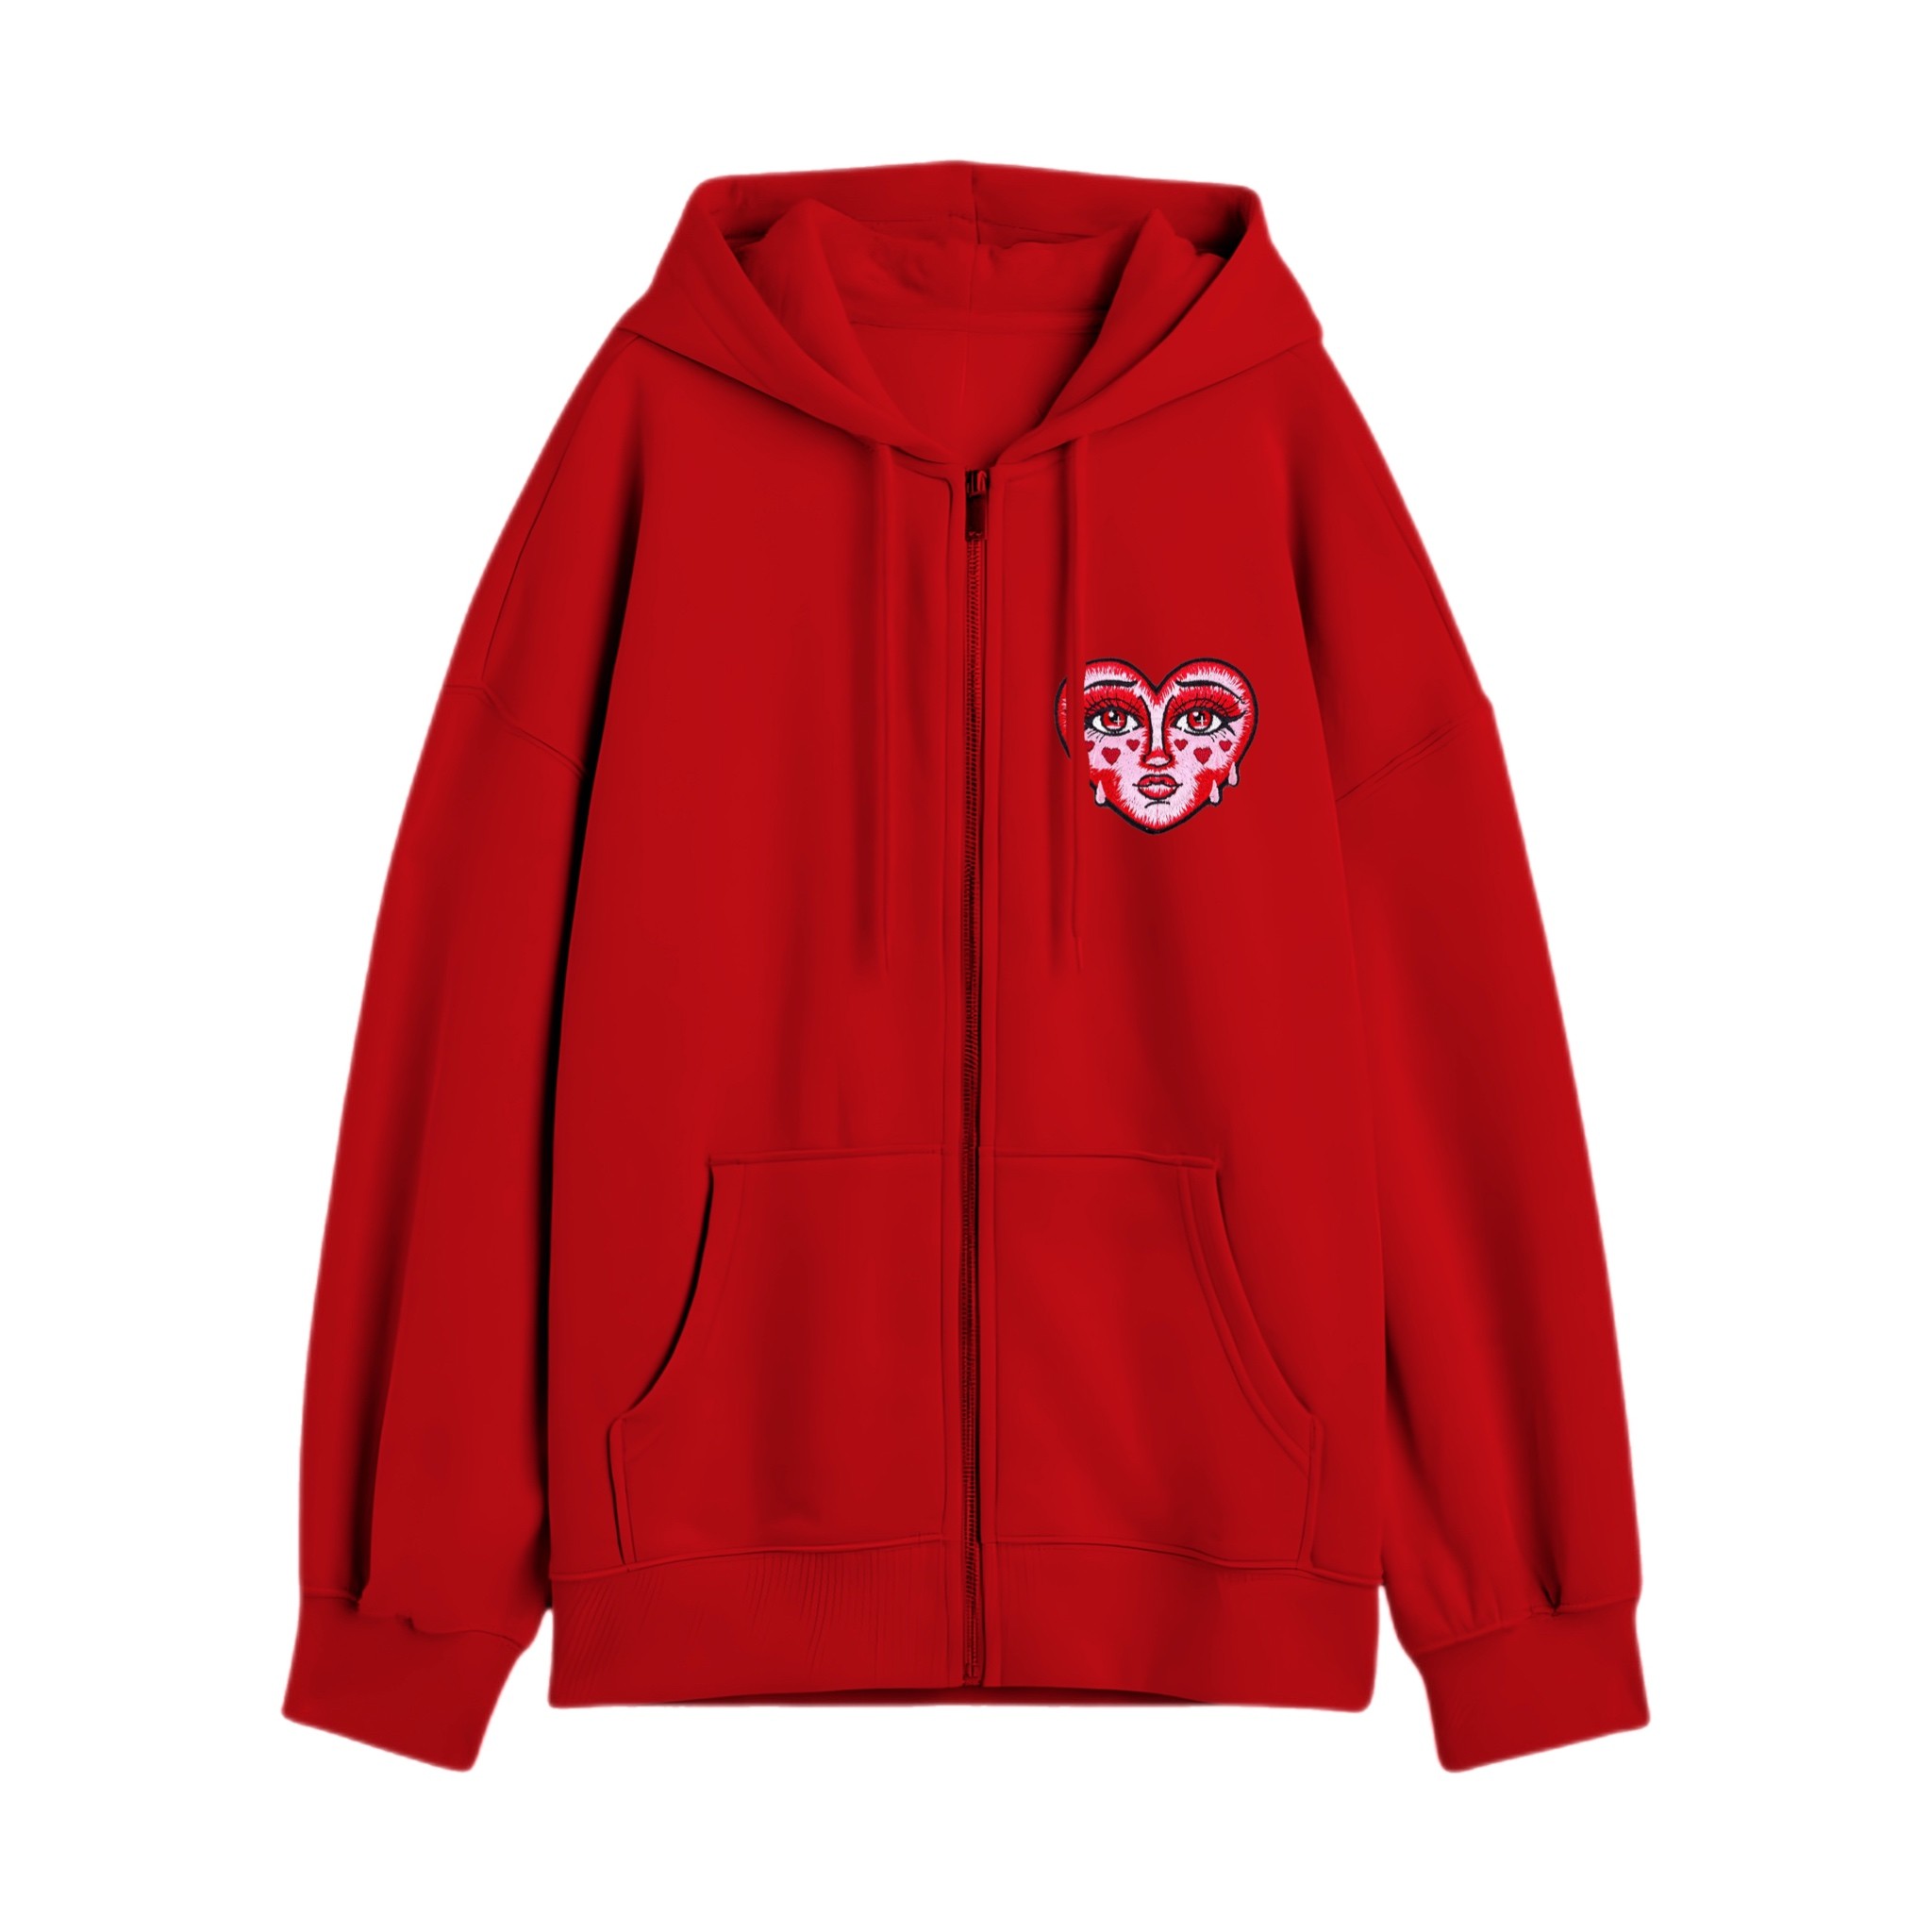 LUVV <3 patched zipped regular fit hoodie